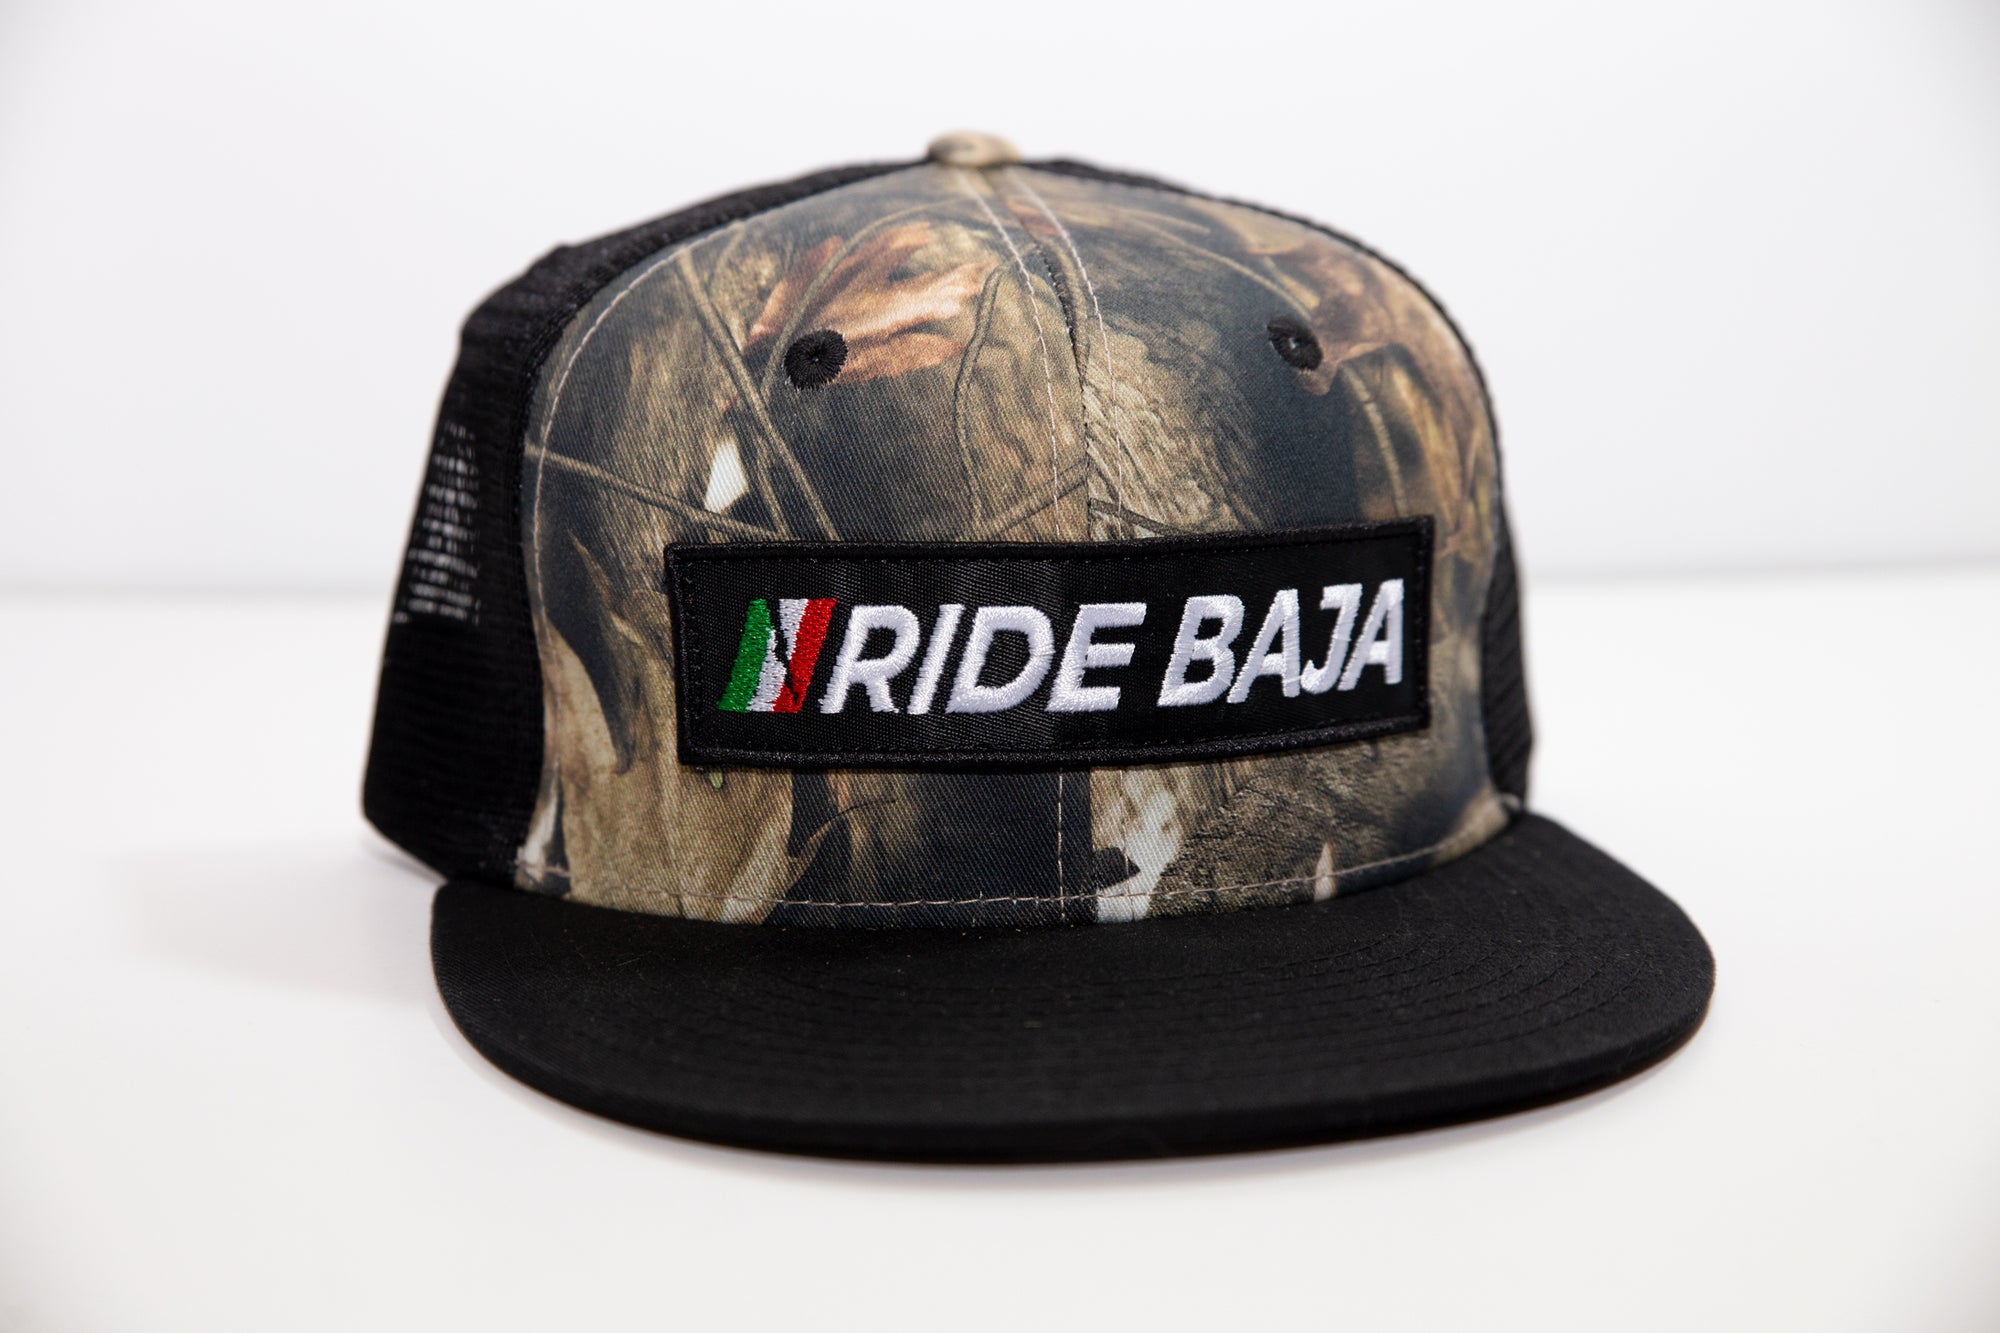 "Ride Baja Mexican Insurance" Rider Hat with Flag. - Hybricam Camo/Black